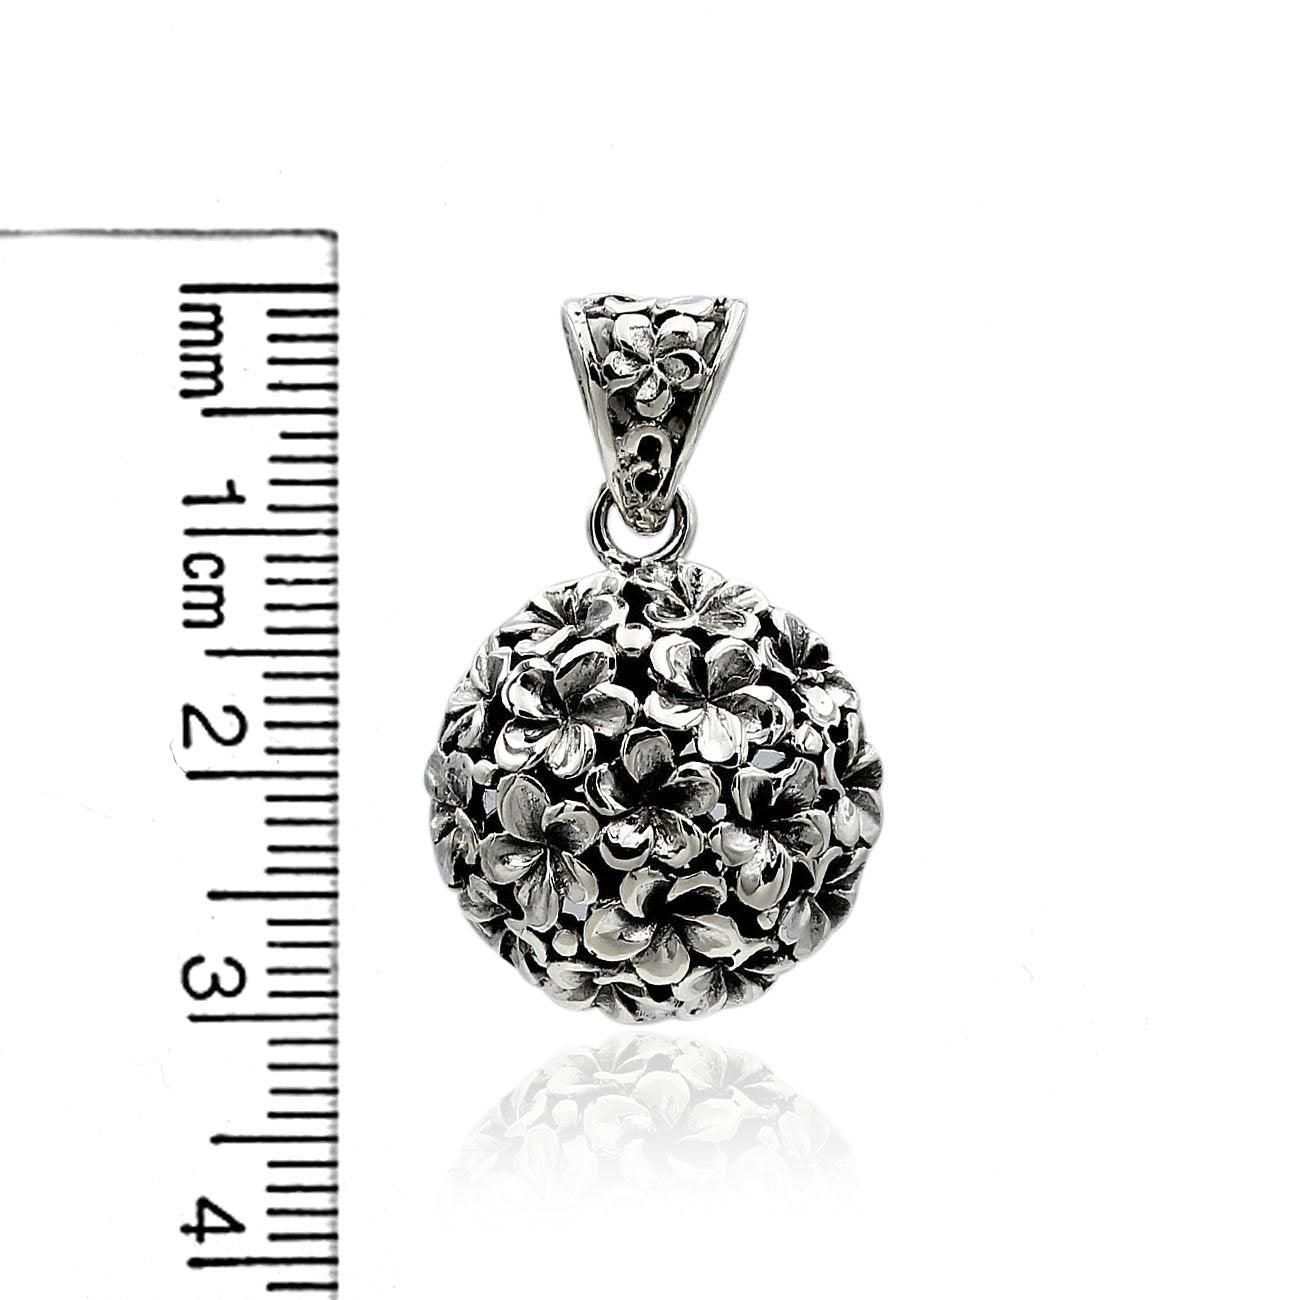 Handmade Bali Frangipani Floral ROUND Pendant in 925 Sterling Silver with Chain - 3.0 Cm - Inspiring Jewellery